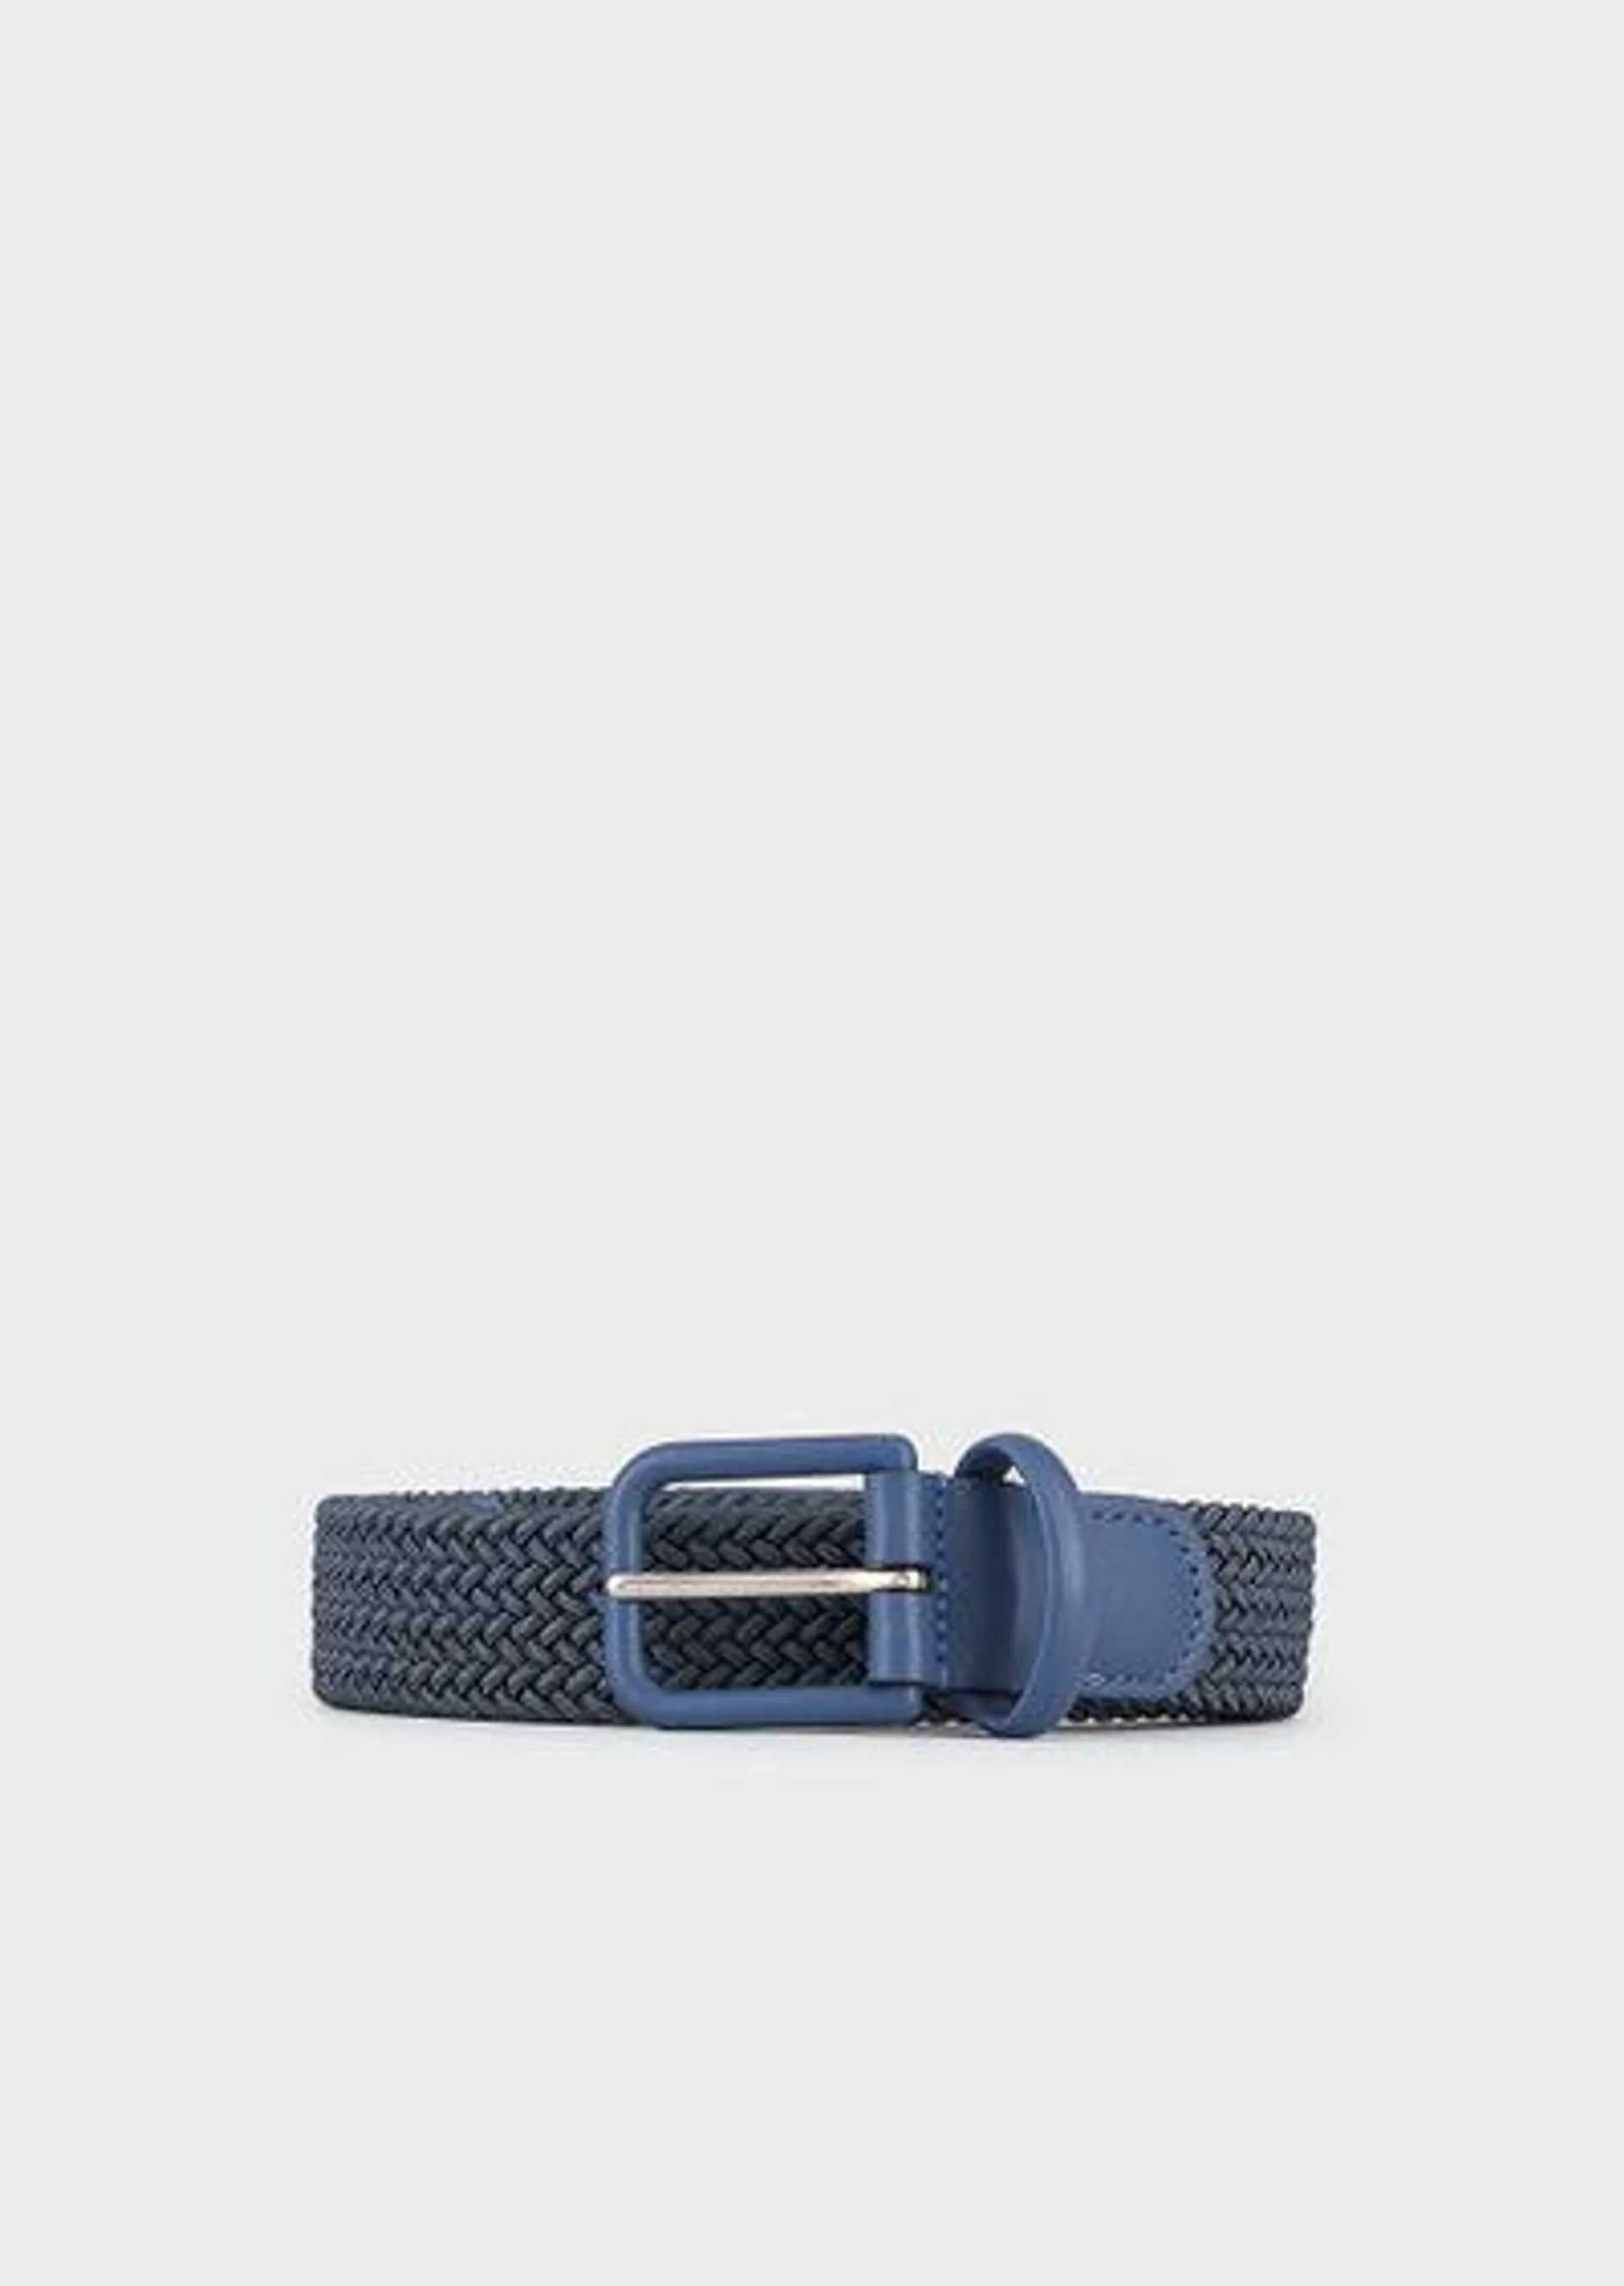 Woven webbing and leather belt